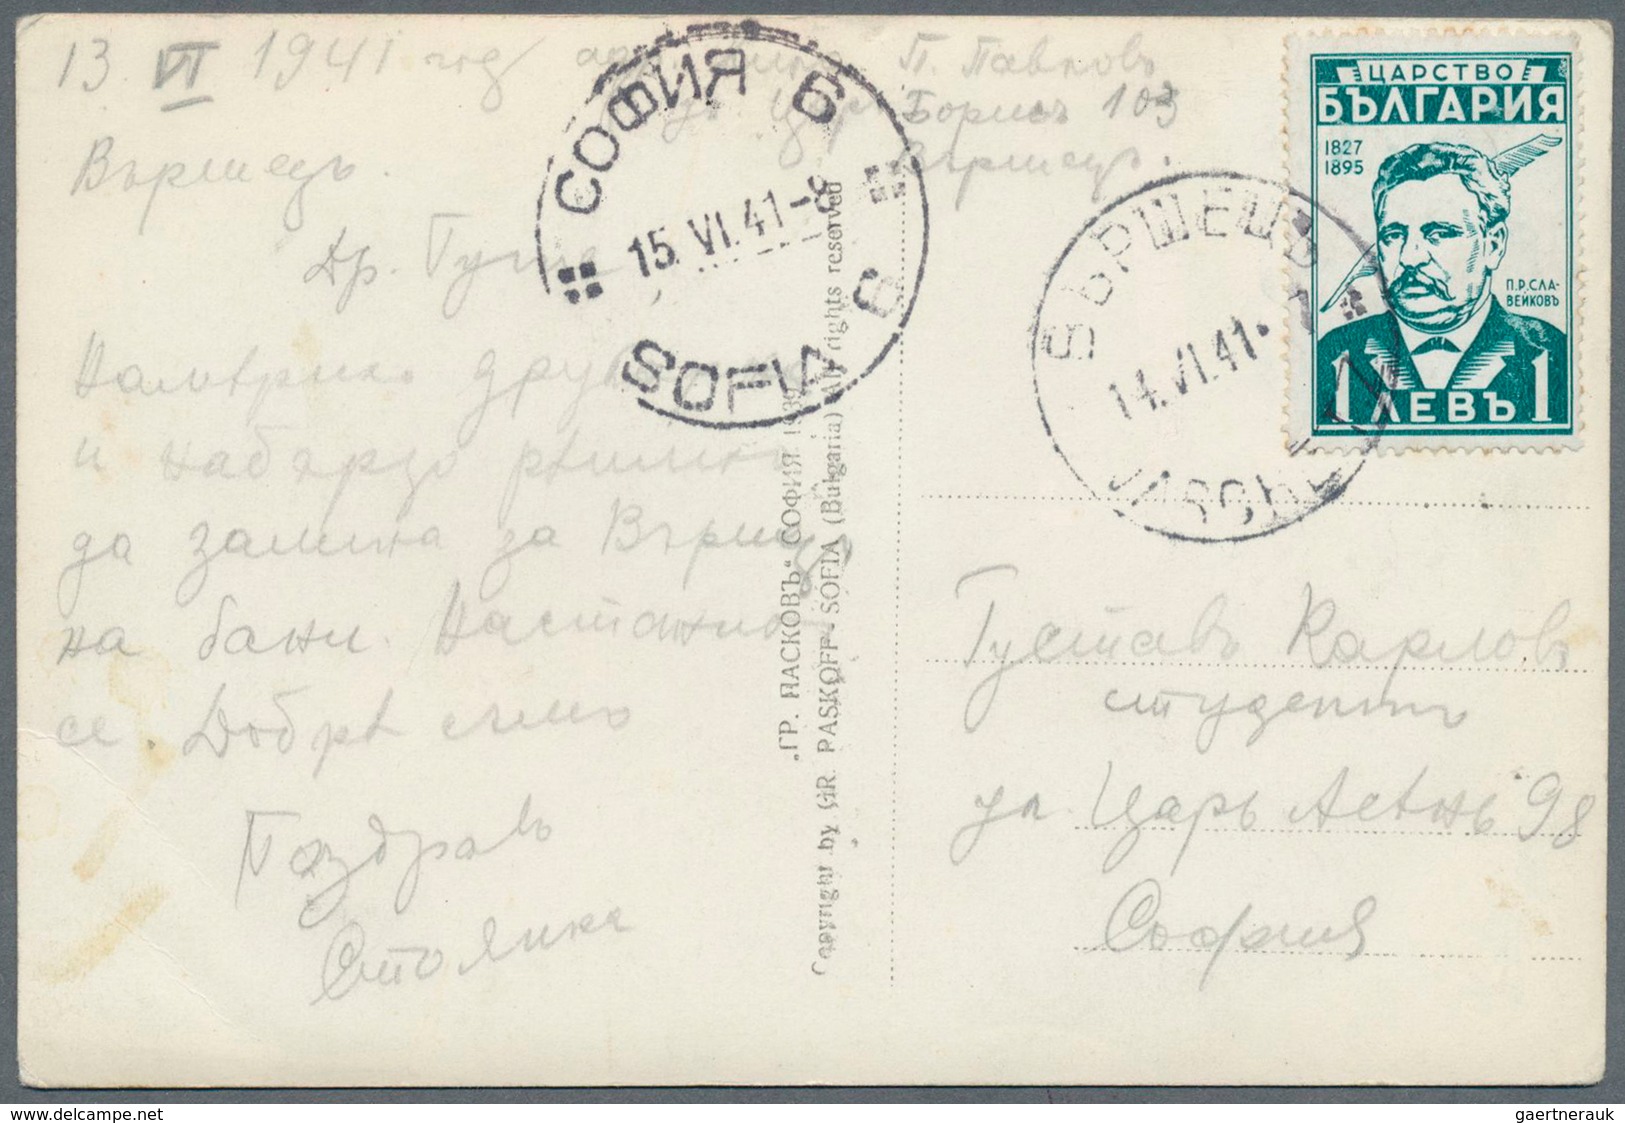 26199 Bulgarien: 1938/1944, group of apprx. 83 commercial covers/cards, many commemoratives, registered, c